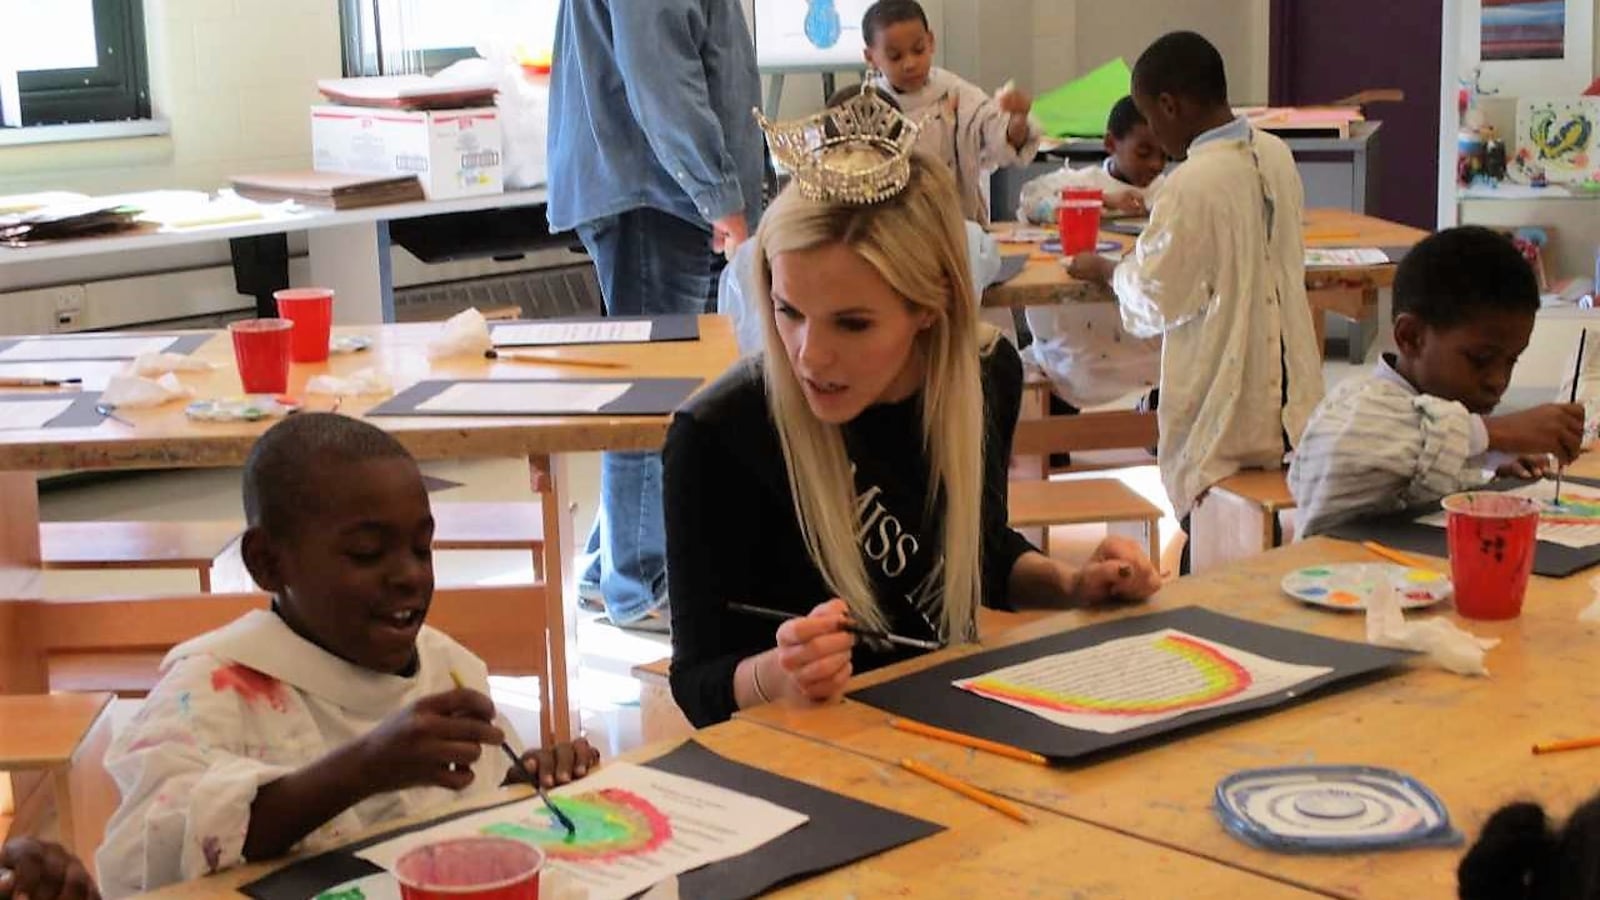 Miss Michigan Heather Heather Kendrick spent the day with students at the Charles H. Wright Academy of Arts and Science in Detroit